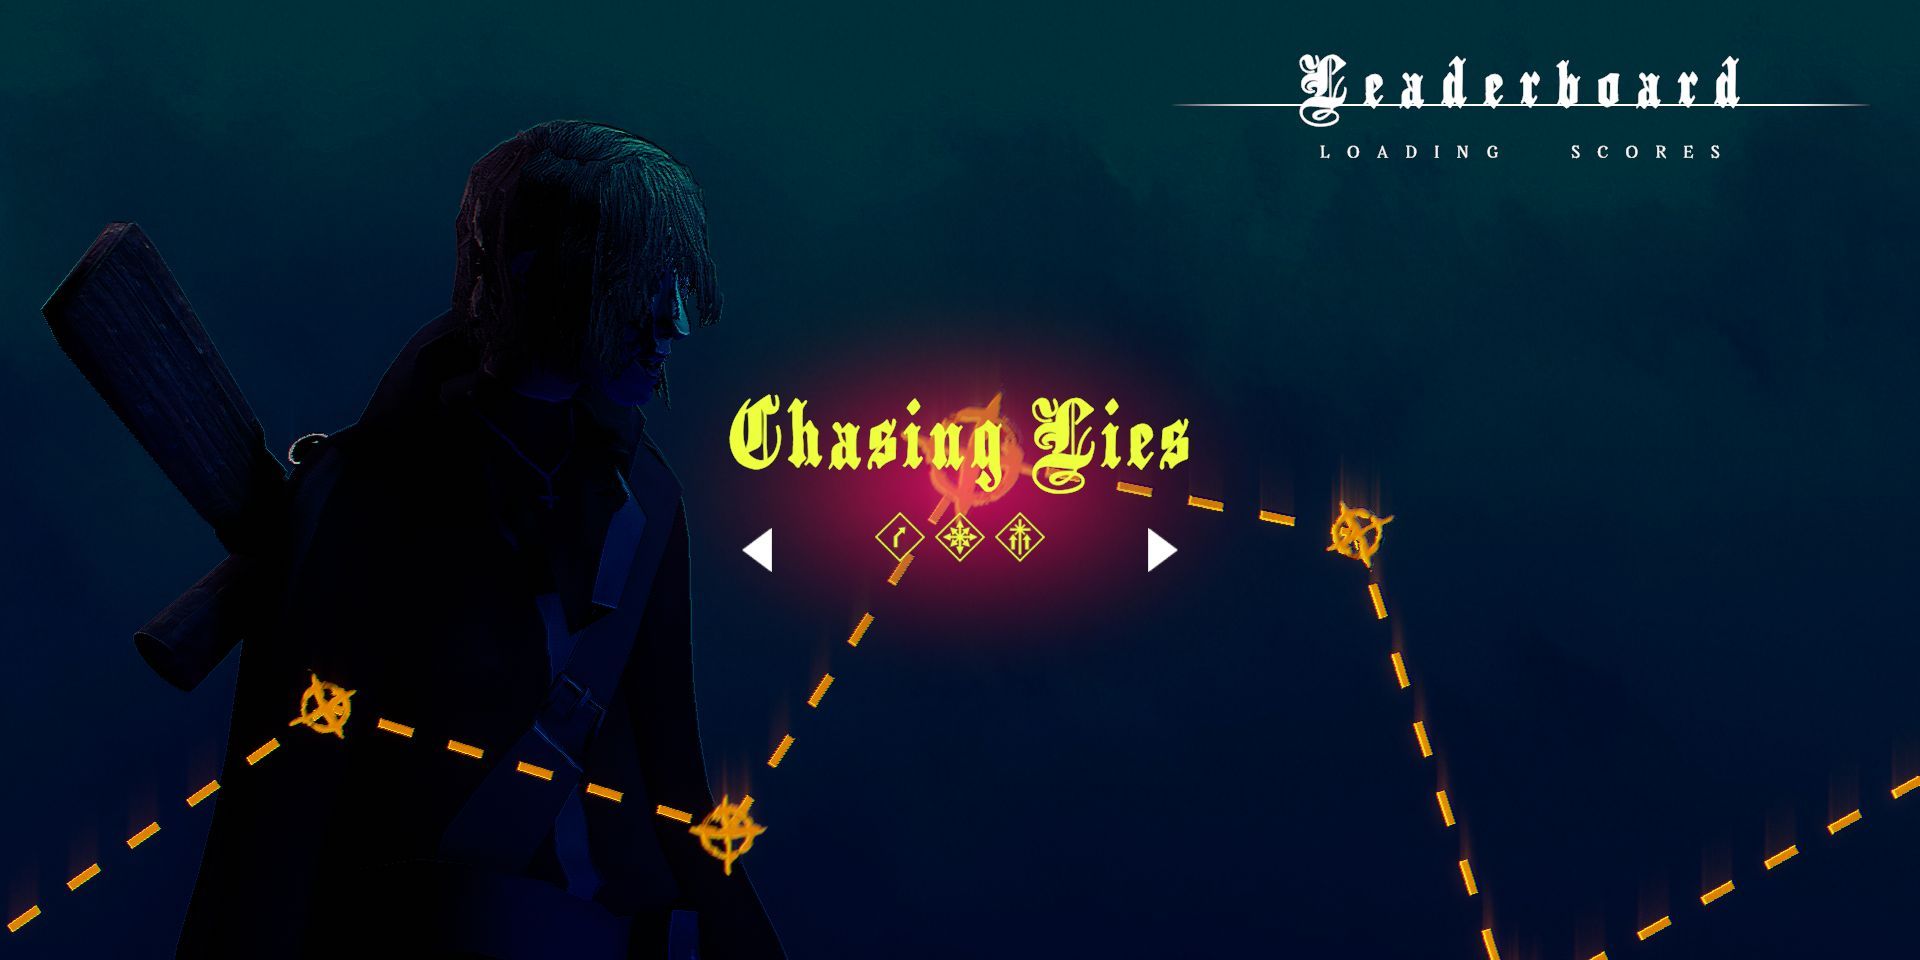 selecting the Chasing Lies mission from Children Of The Sun